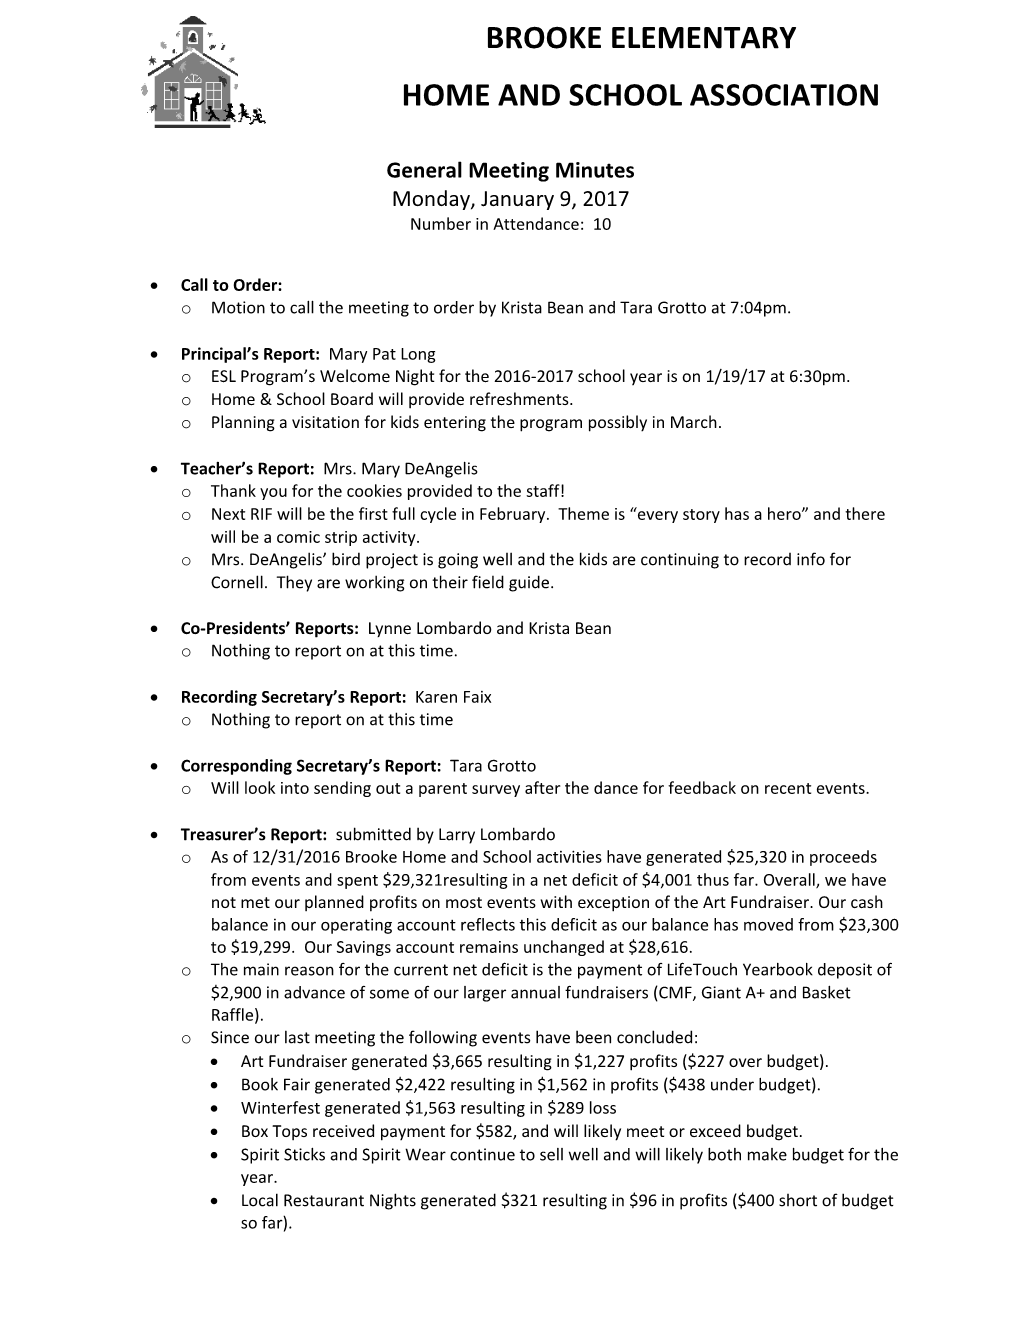 O Motion to Call the Meeting to Order by Krista Bean and Tara Grotto at 7:04Pm